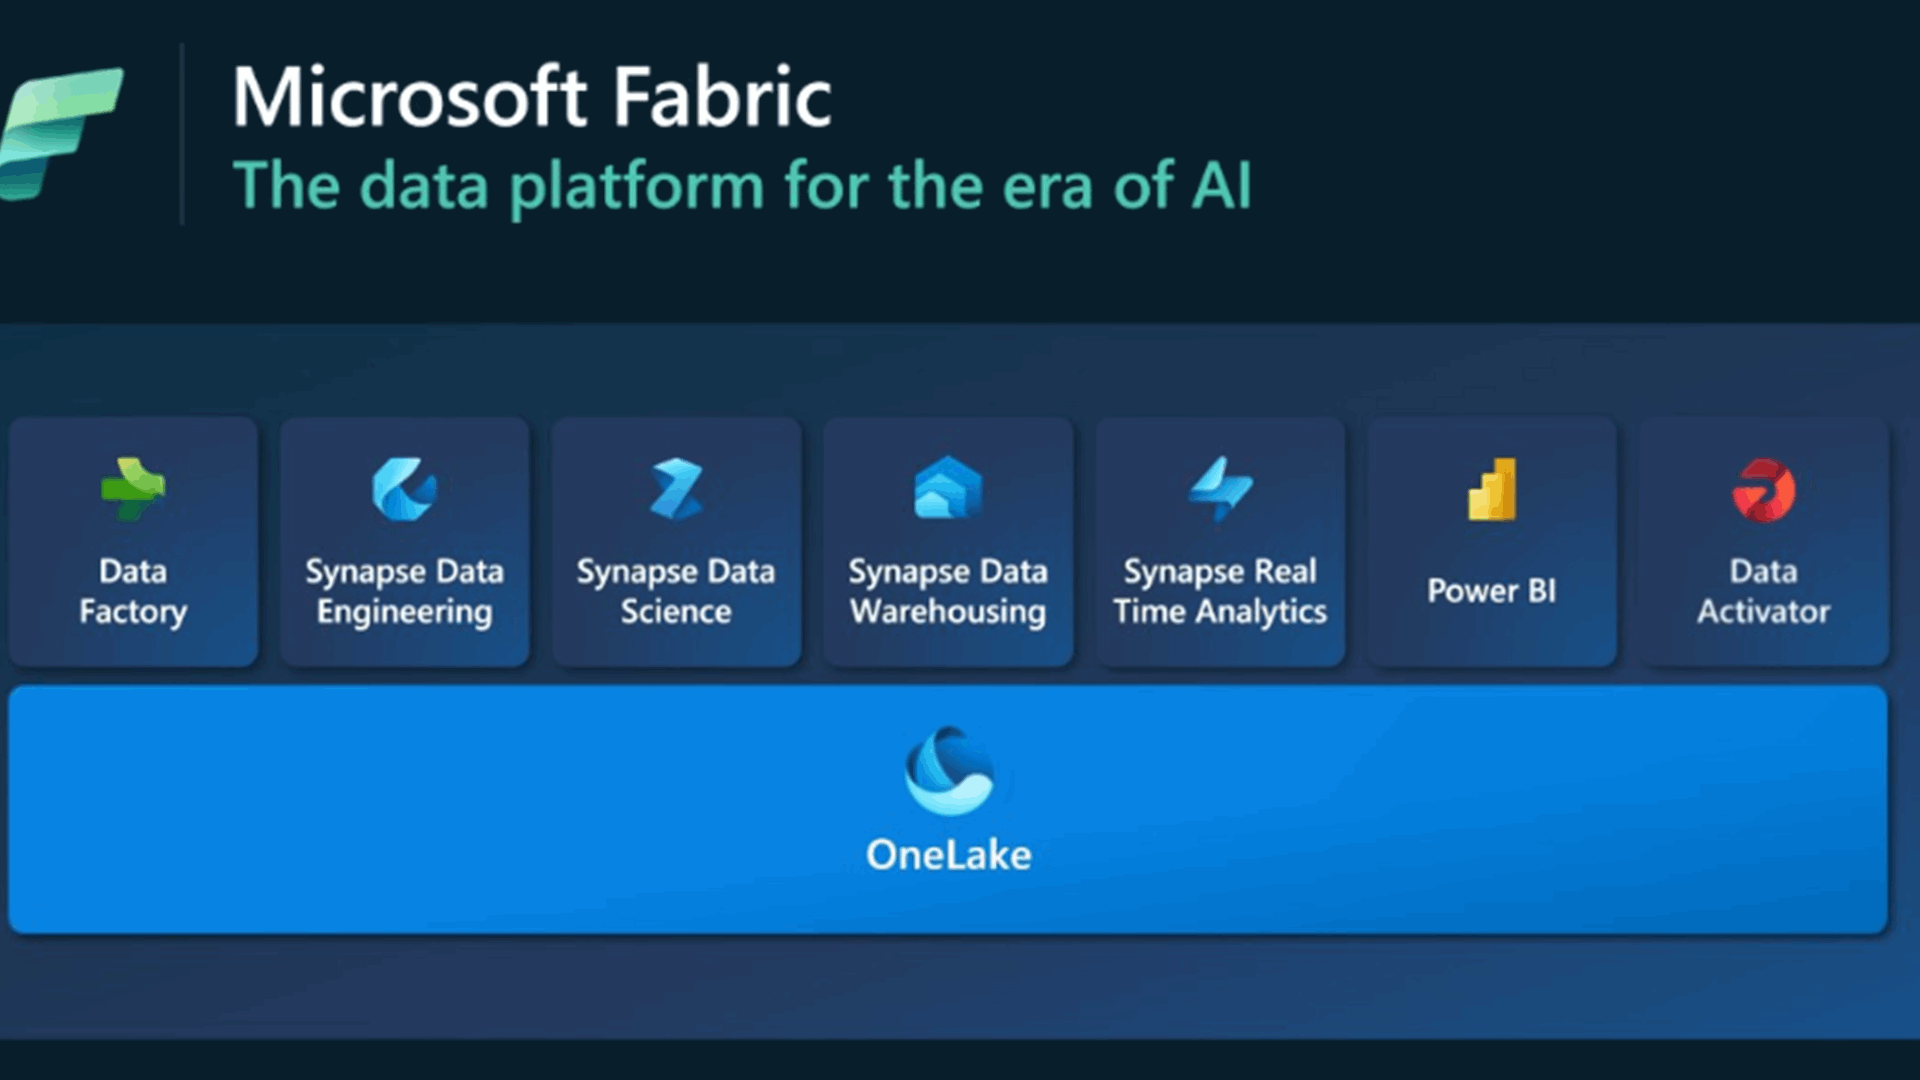 Microsoft launches Fabric, a new end-to-end data and analytics platform